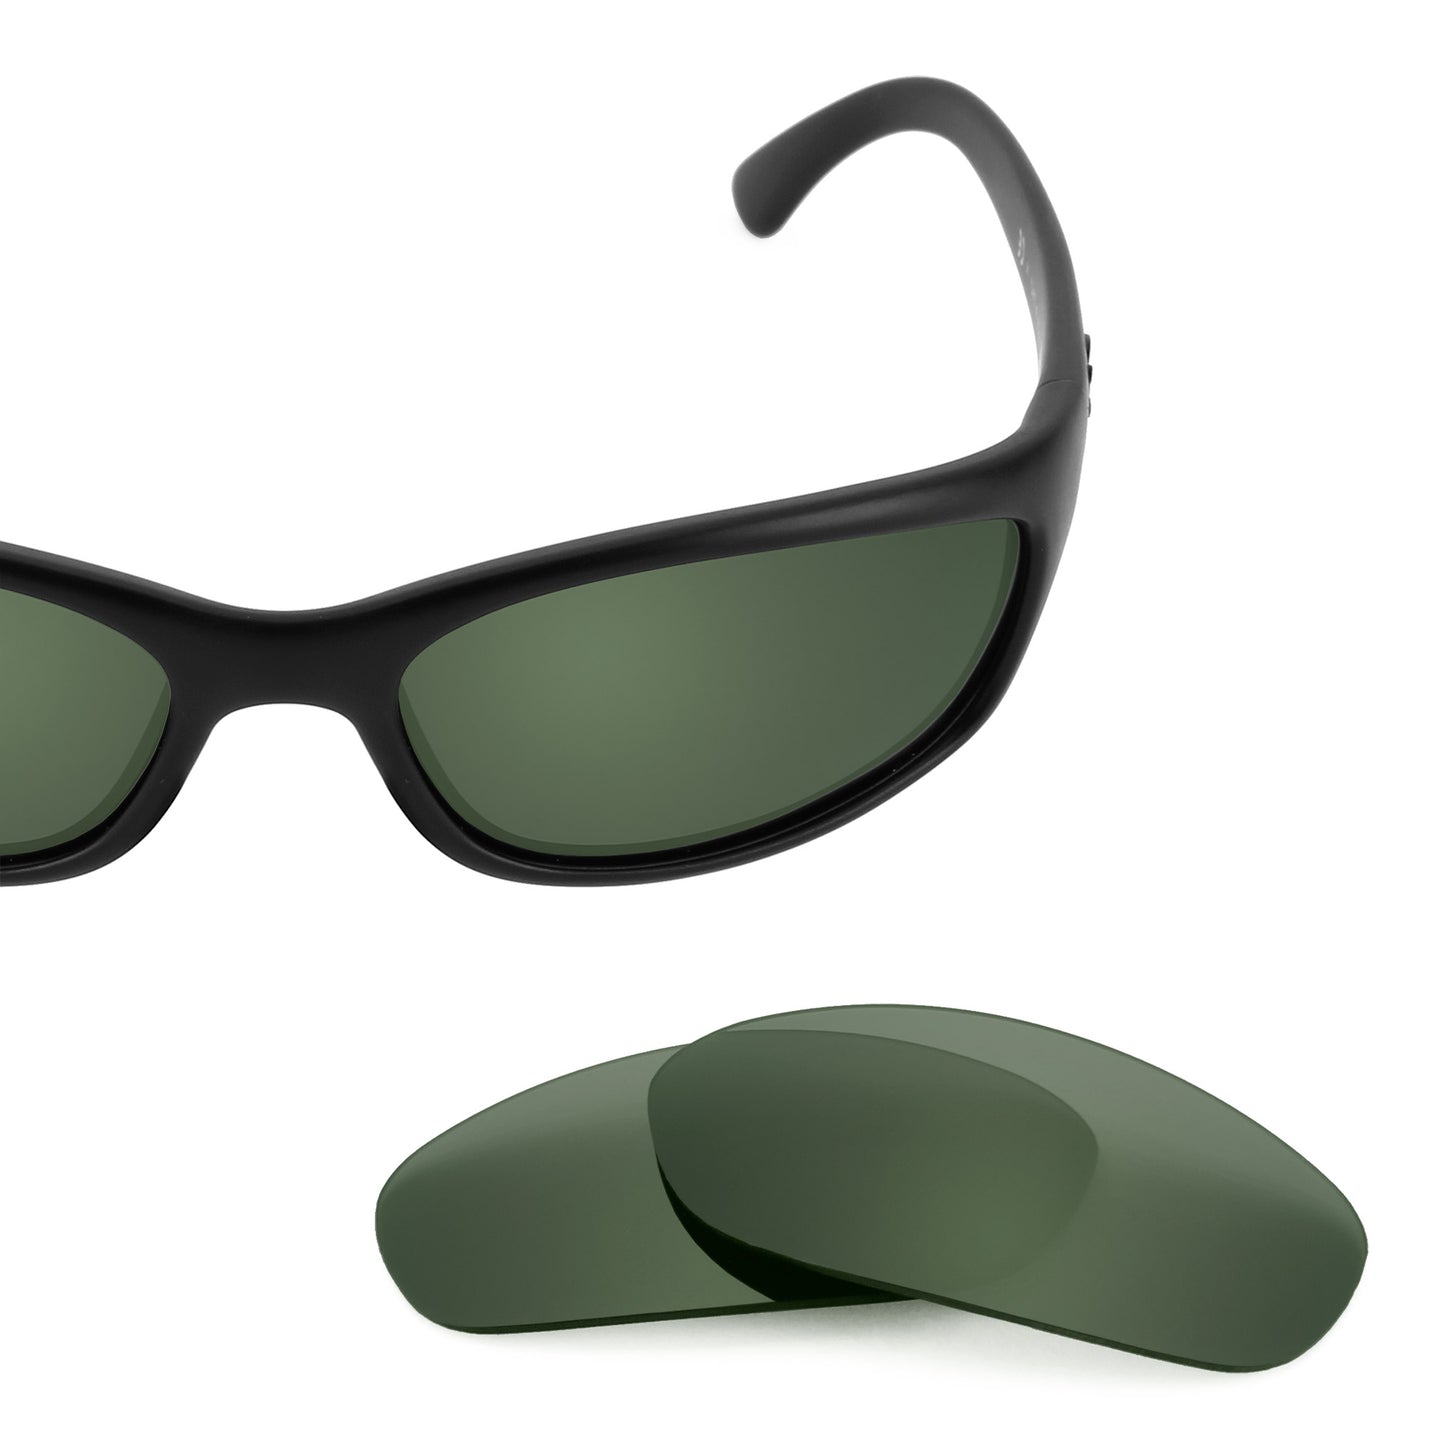 Revant replacement lenses for Ray-Ban RB4115 57mm Elite Polarized Gray Green